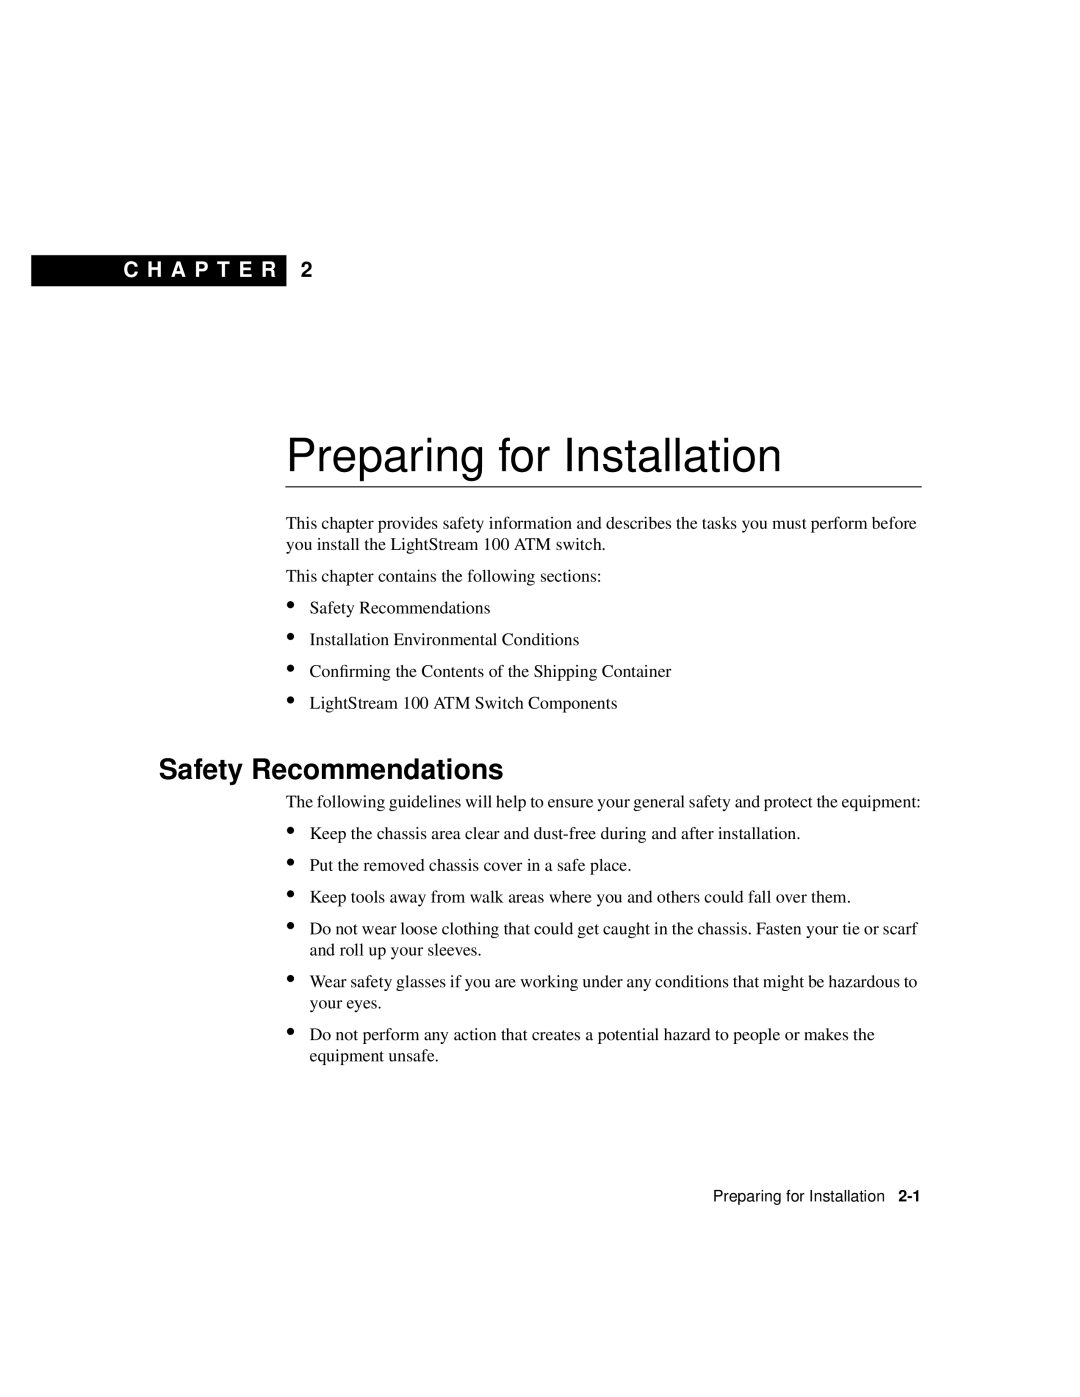 Cisco Systems LightStream 100 manual Safety Recommendations, Preparing for Installation, C H A P T E R 